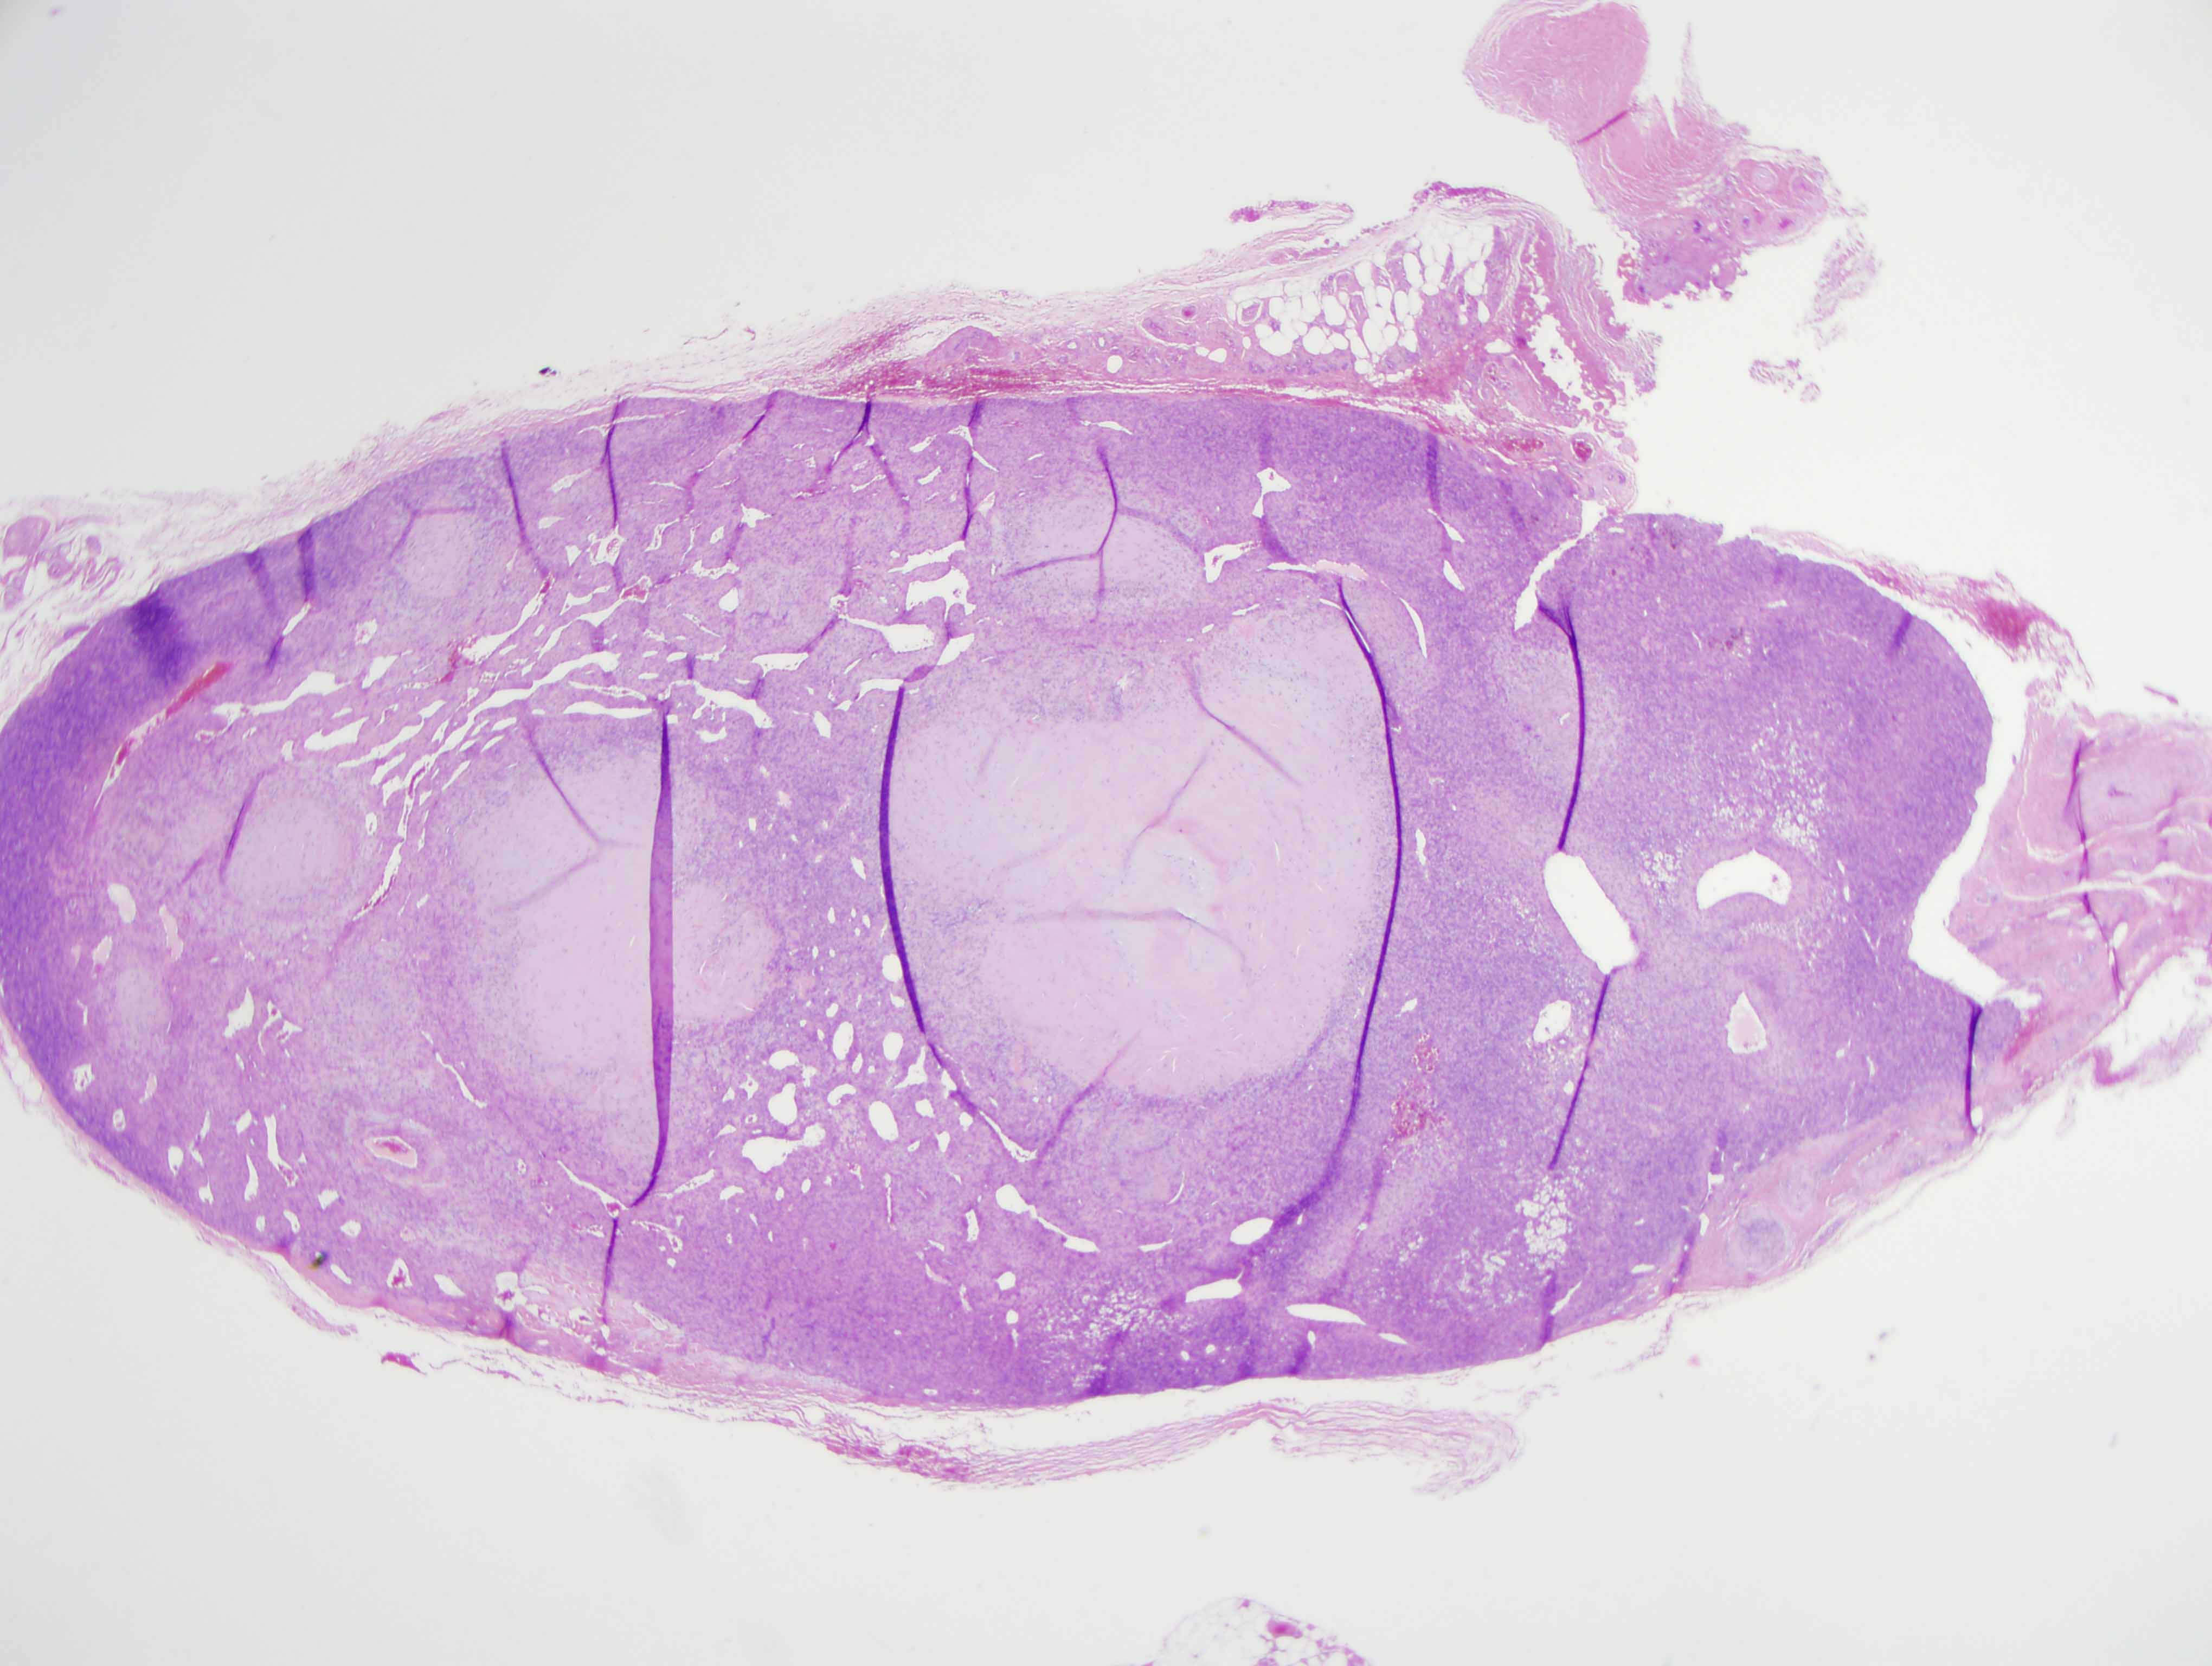 Slide 1: The excision specimen shows a circumscribed nodular tumor that has a biphasic pattern characterized by discrete foci that are hyalinized to basophilic and somewhat chondroid in quality.